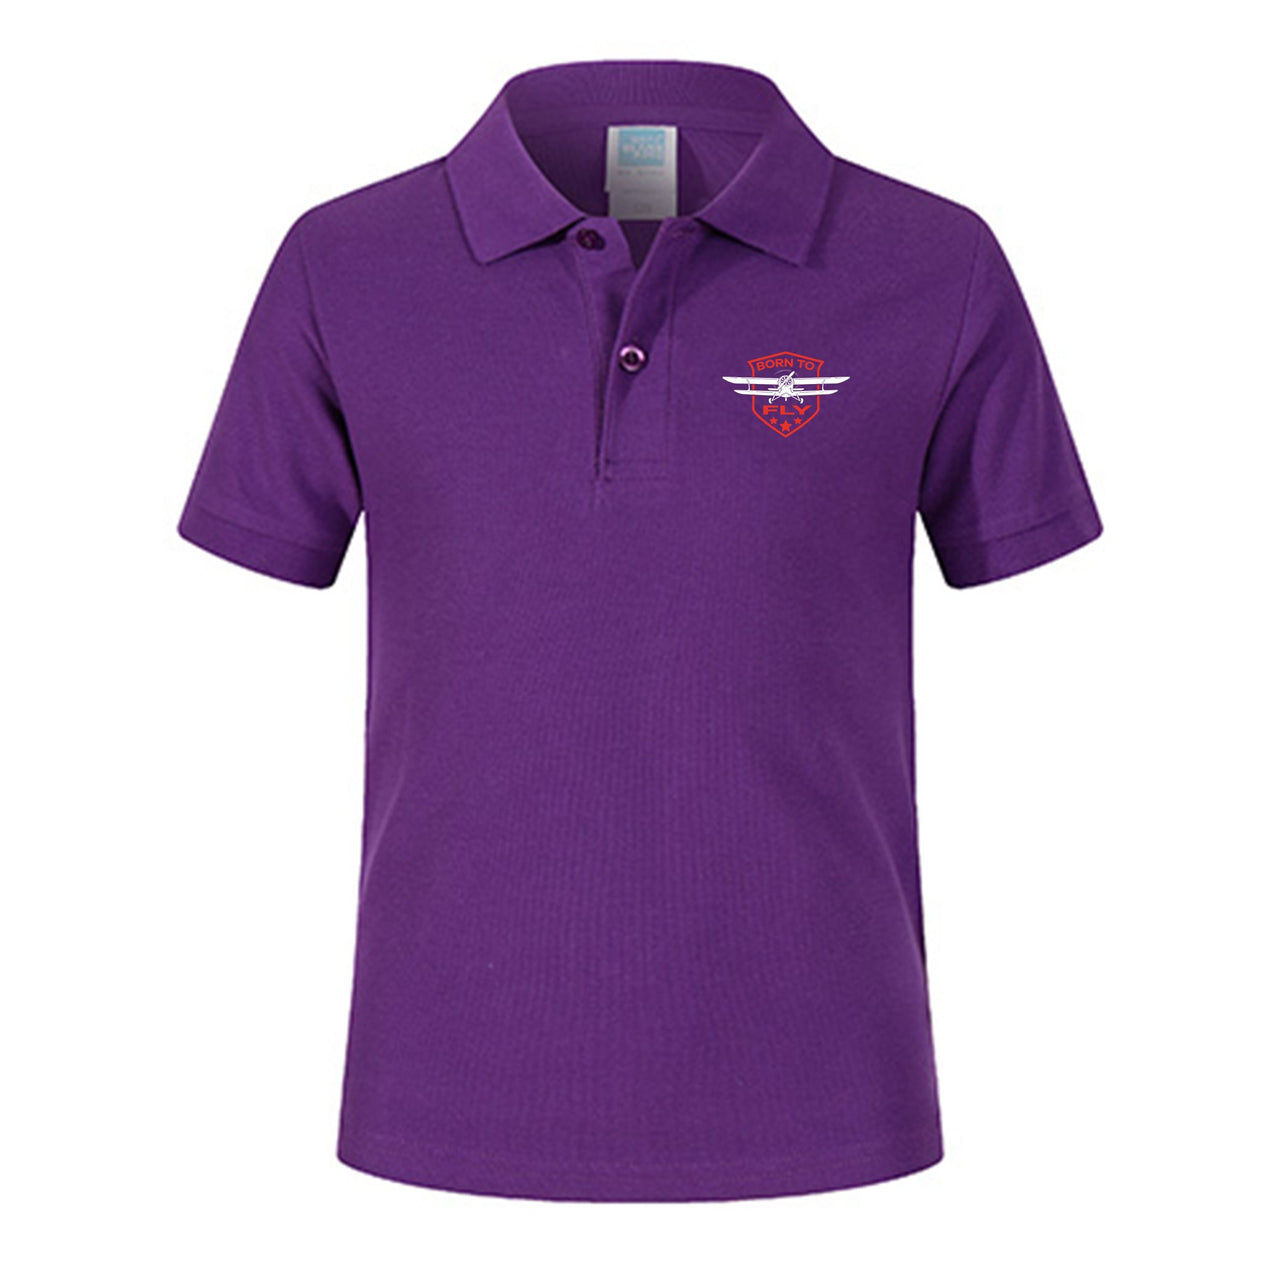 Super Born To Fly Designed Children Polo T-Shirts